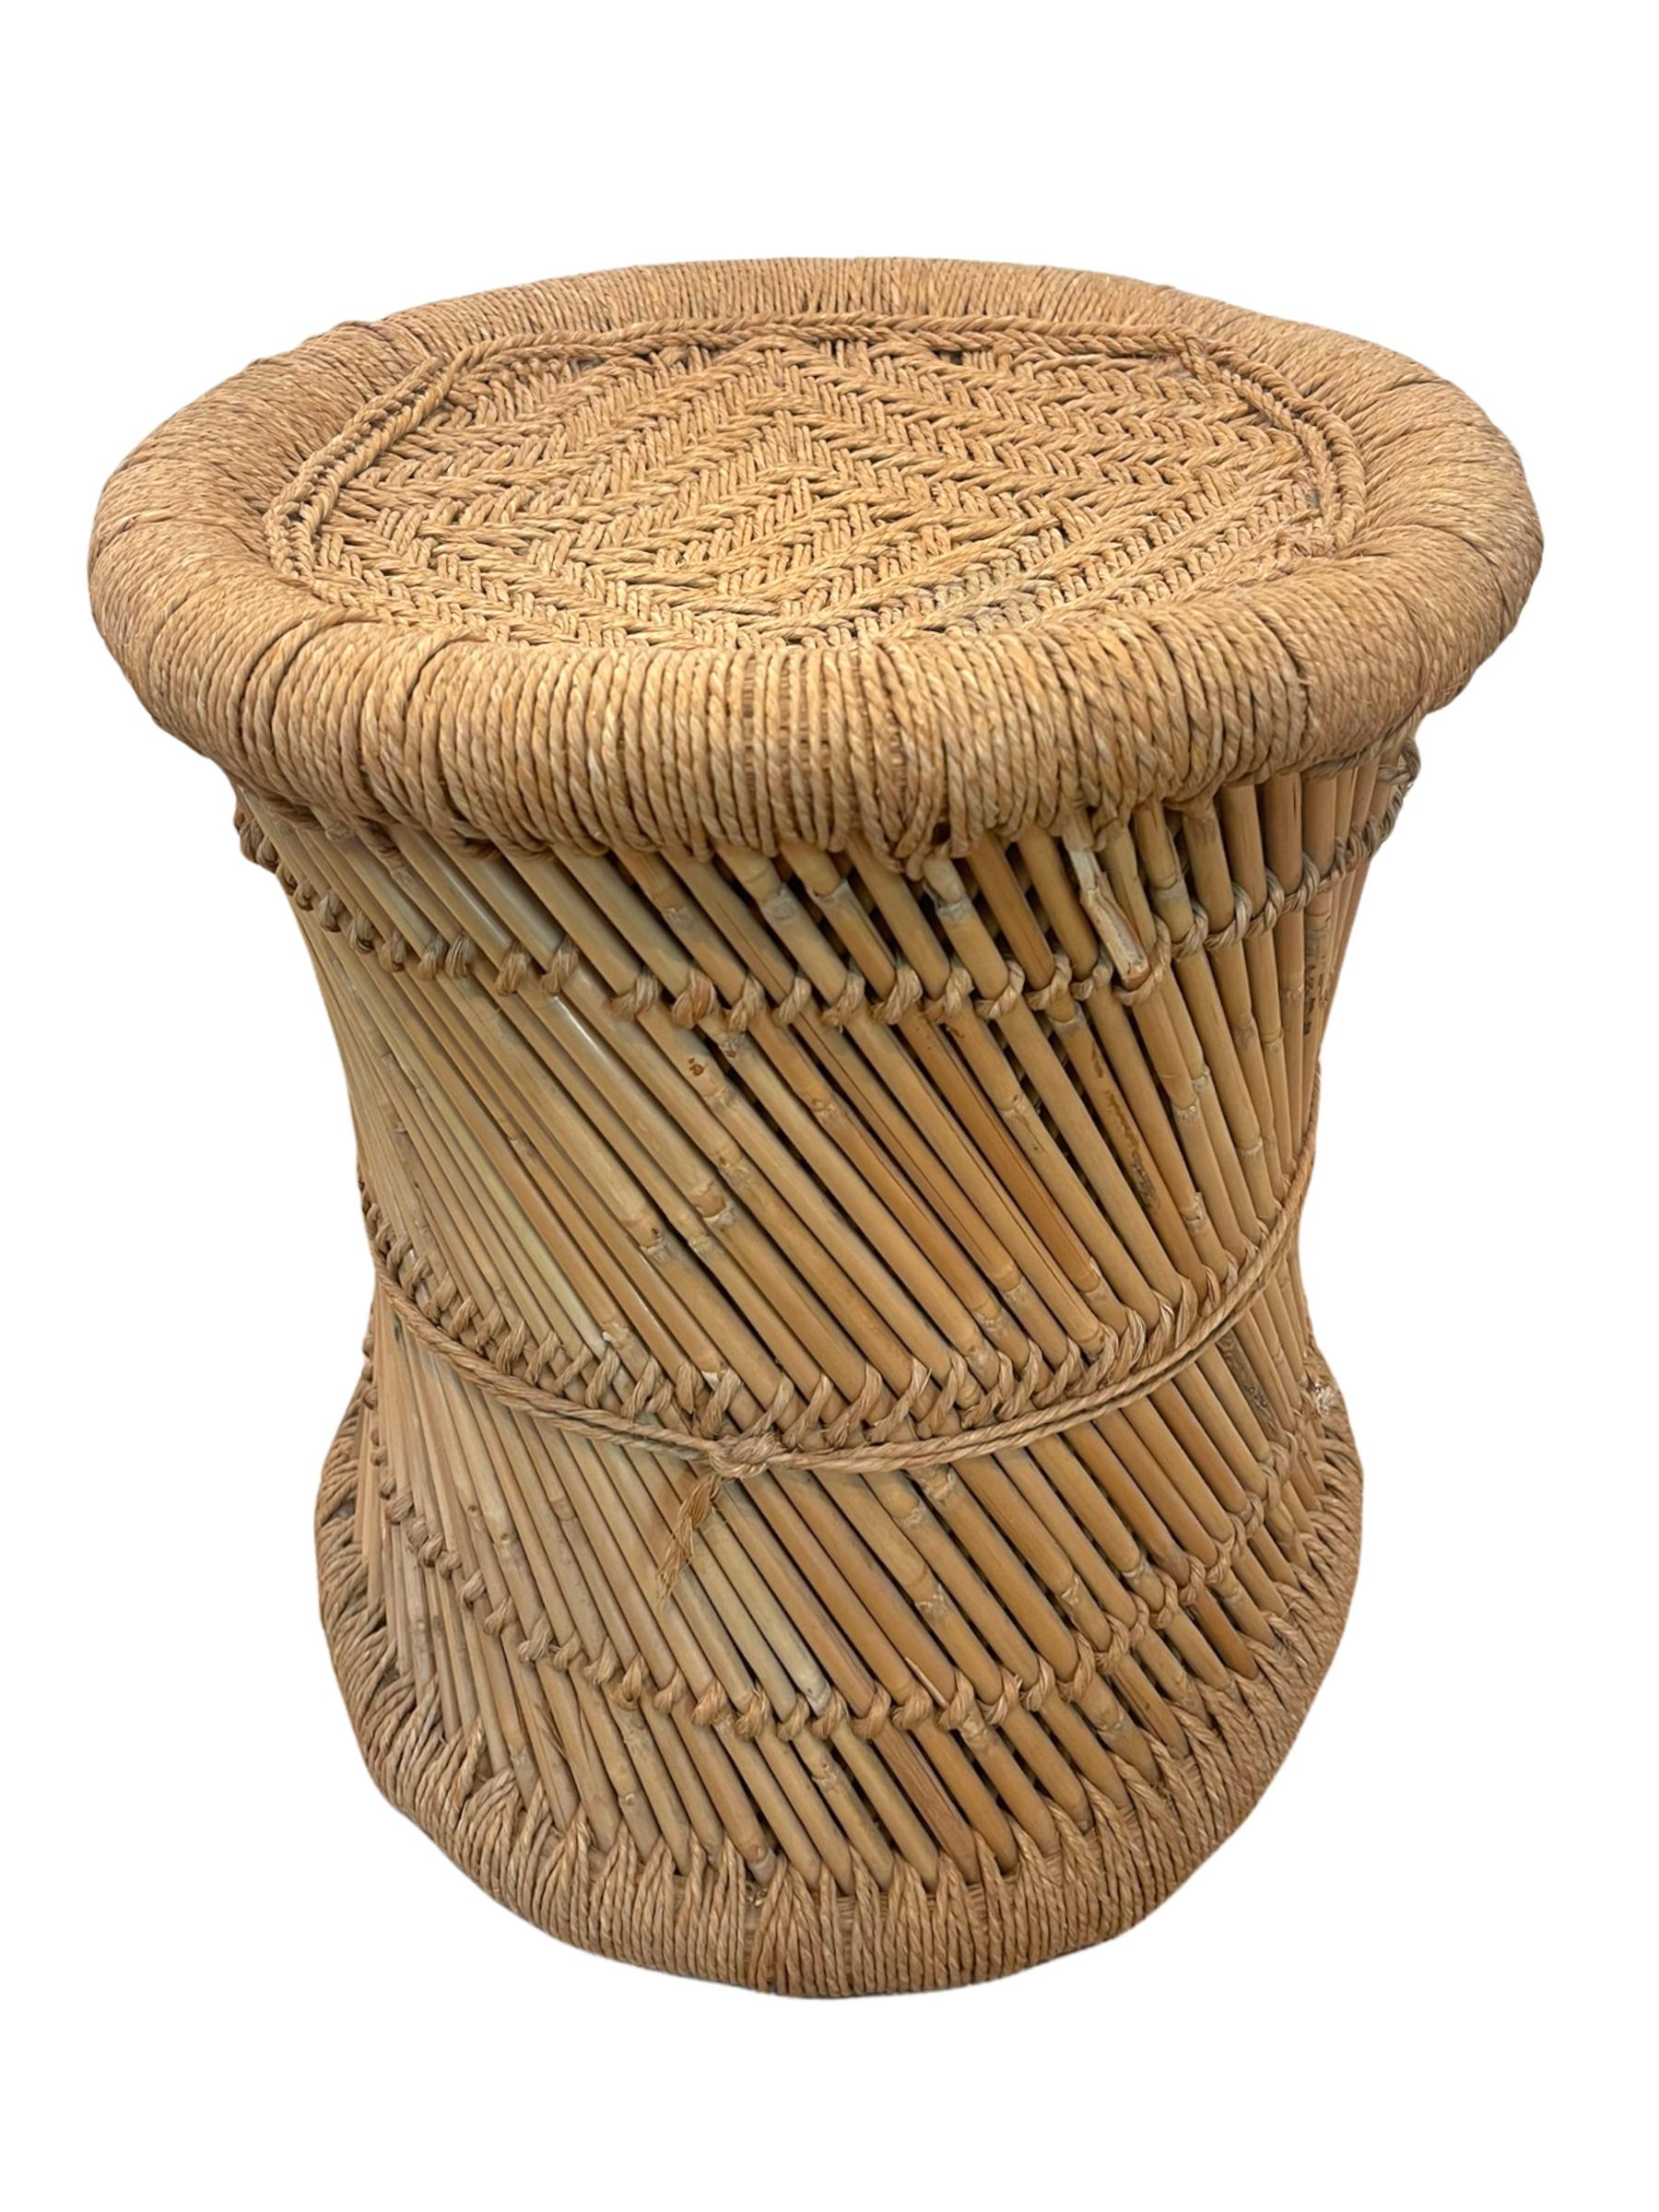 Rattan and rope stool.

Mid-Century Modern rattan and bamboo round stool. This amazing item was produced circa 1970s. This piece is fantastic as it is very adaptable in very good original condition. This stool is perfect to improve a living room,